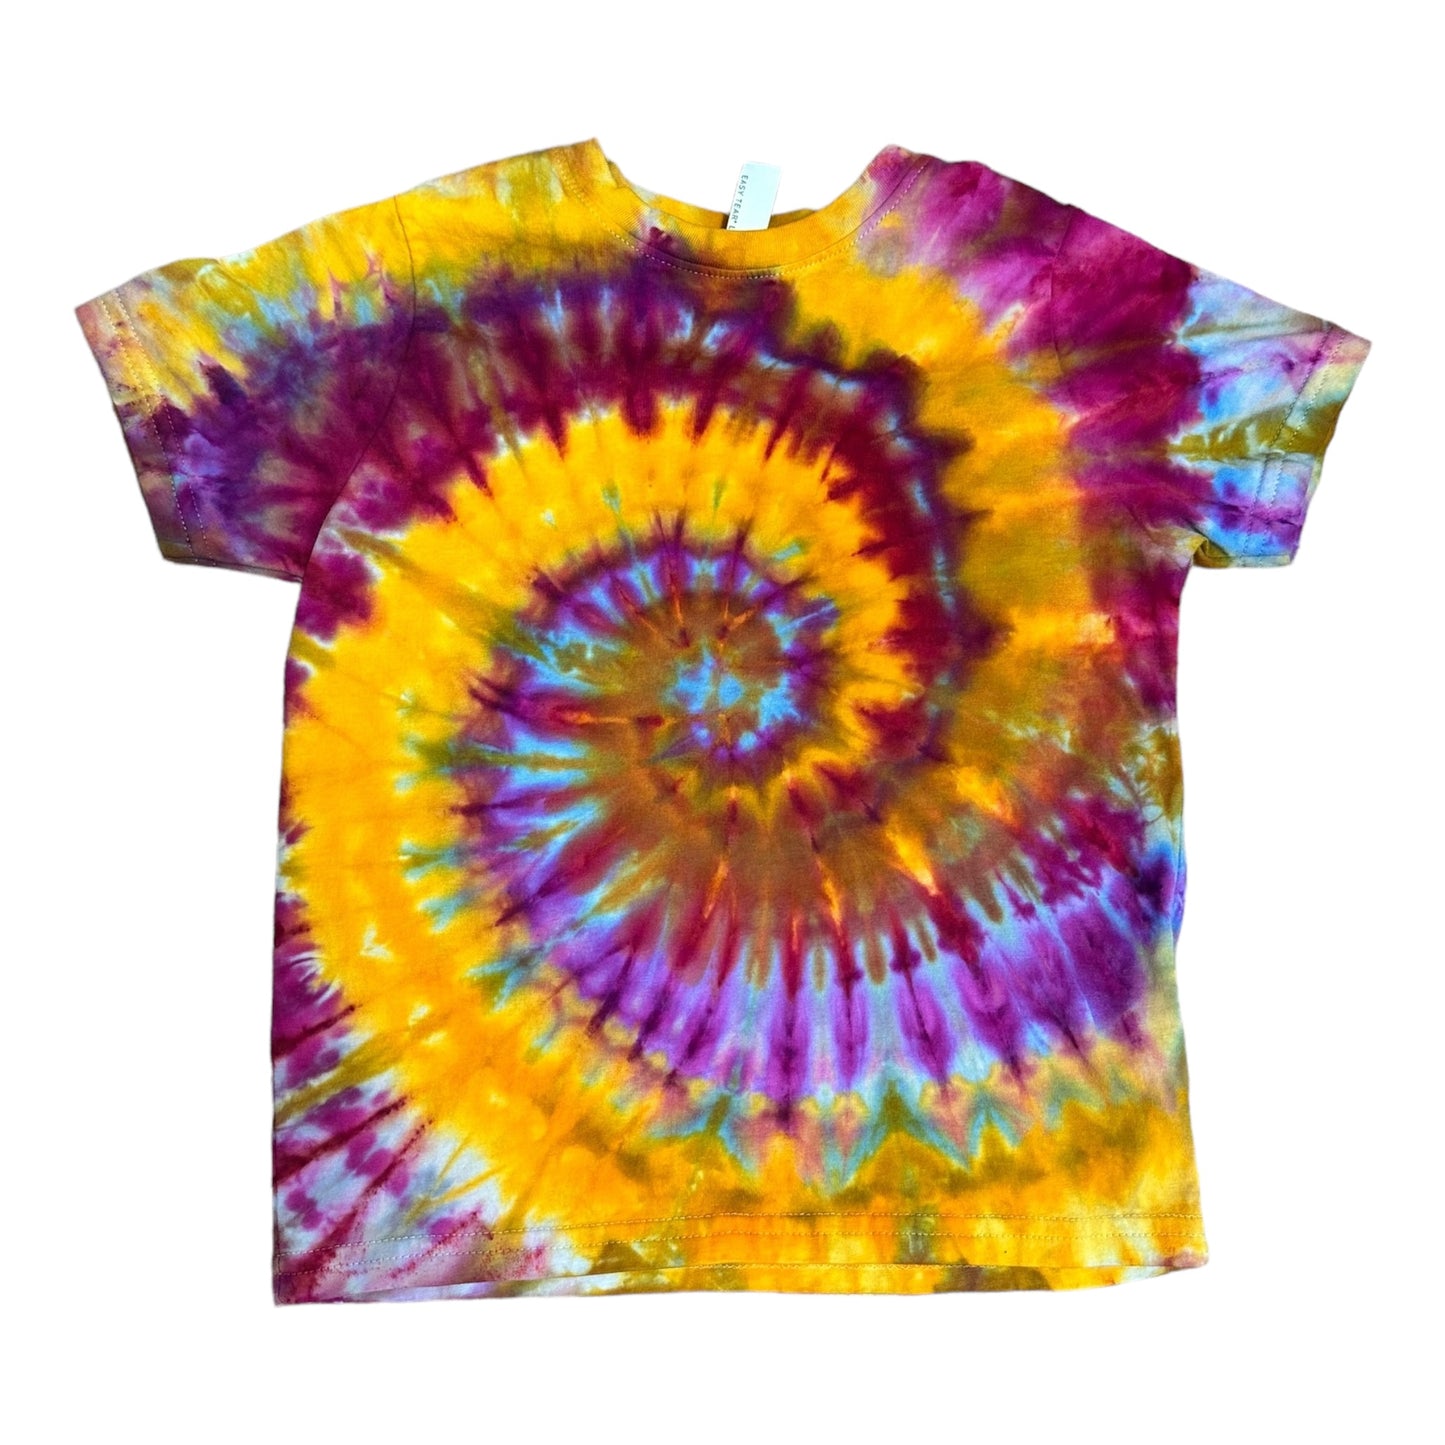 Toddler 5T Yellow Purple Blue and Green Spiral Ice Dye Tie Dye Shirt